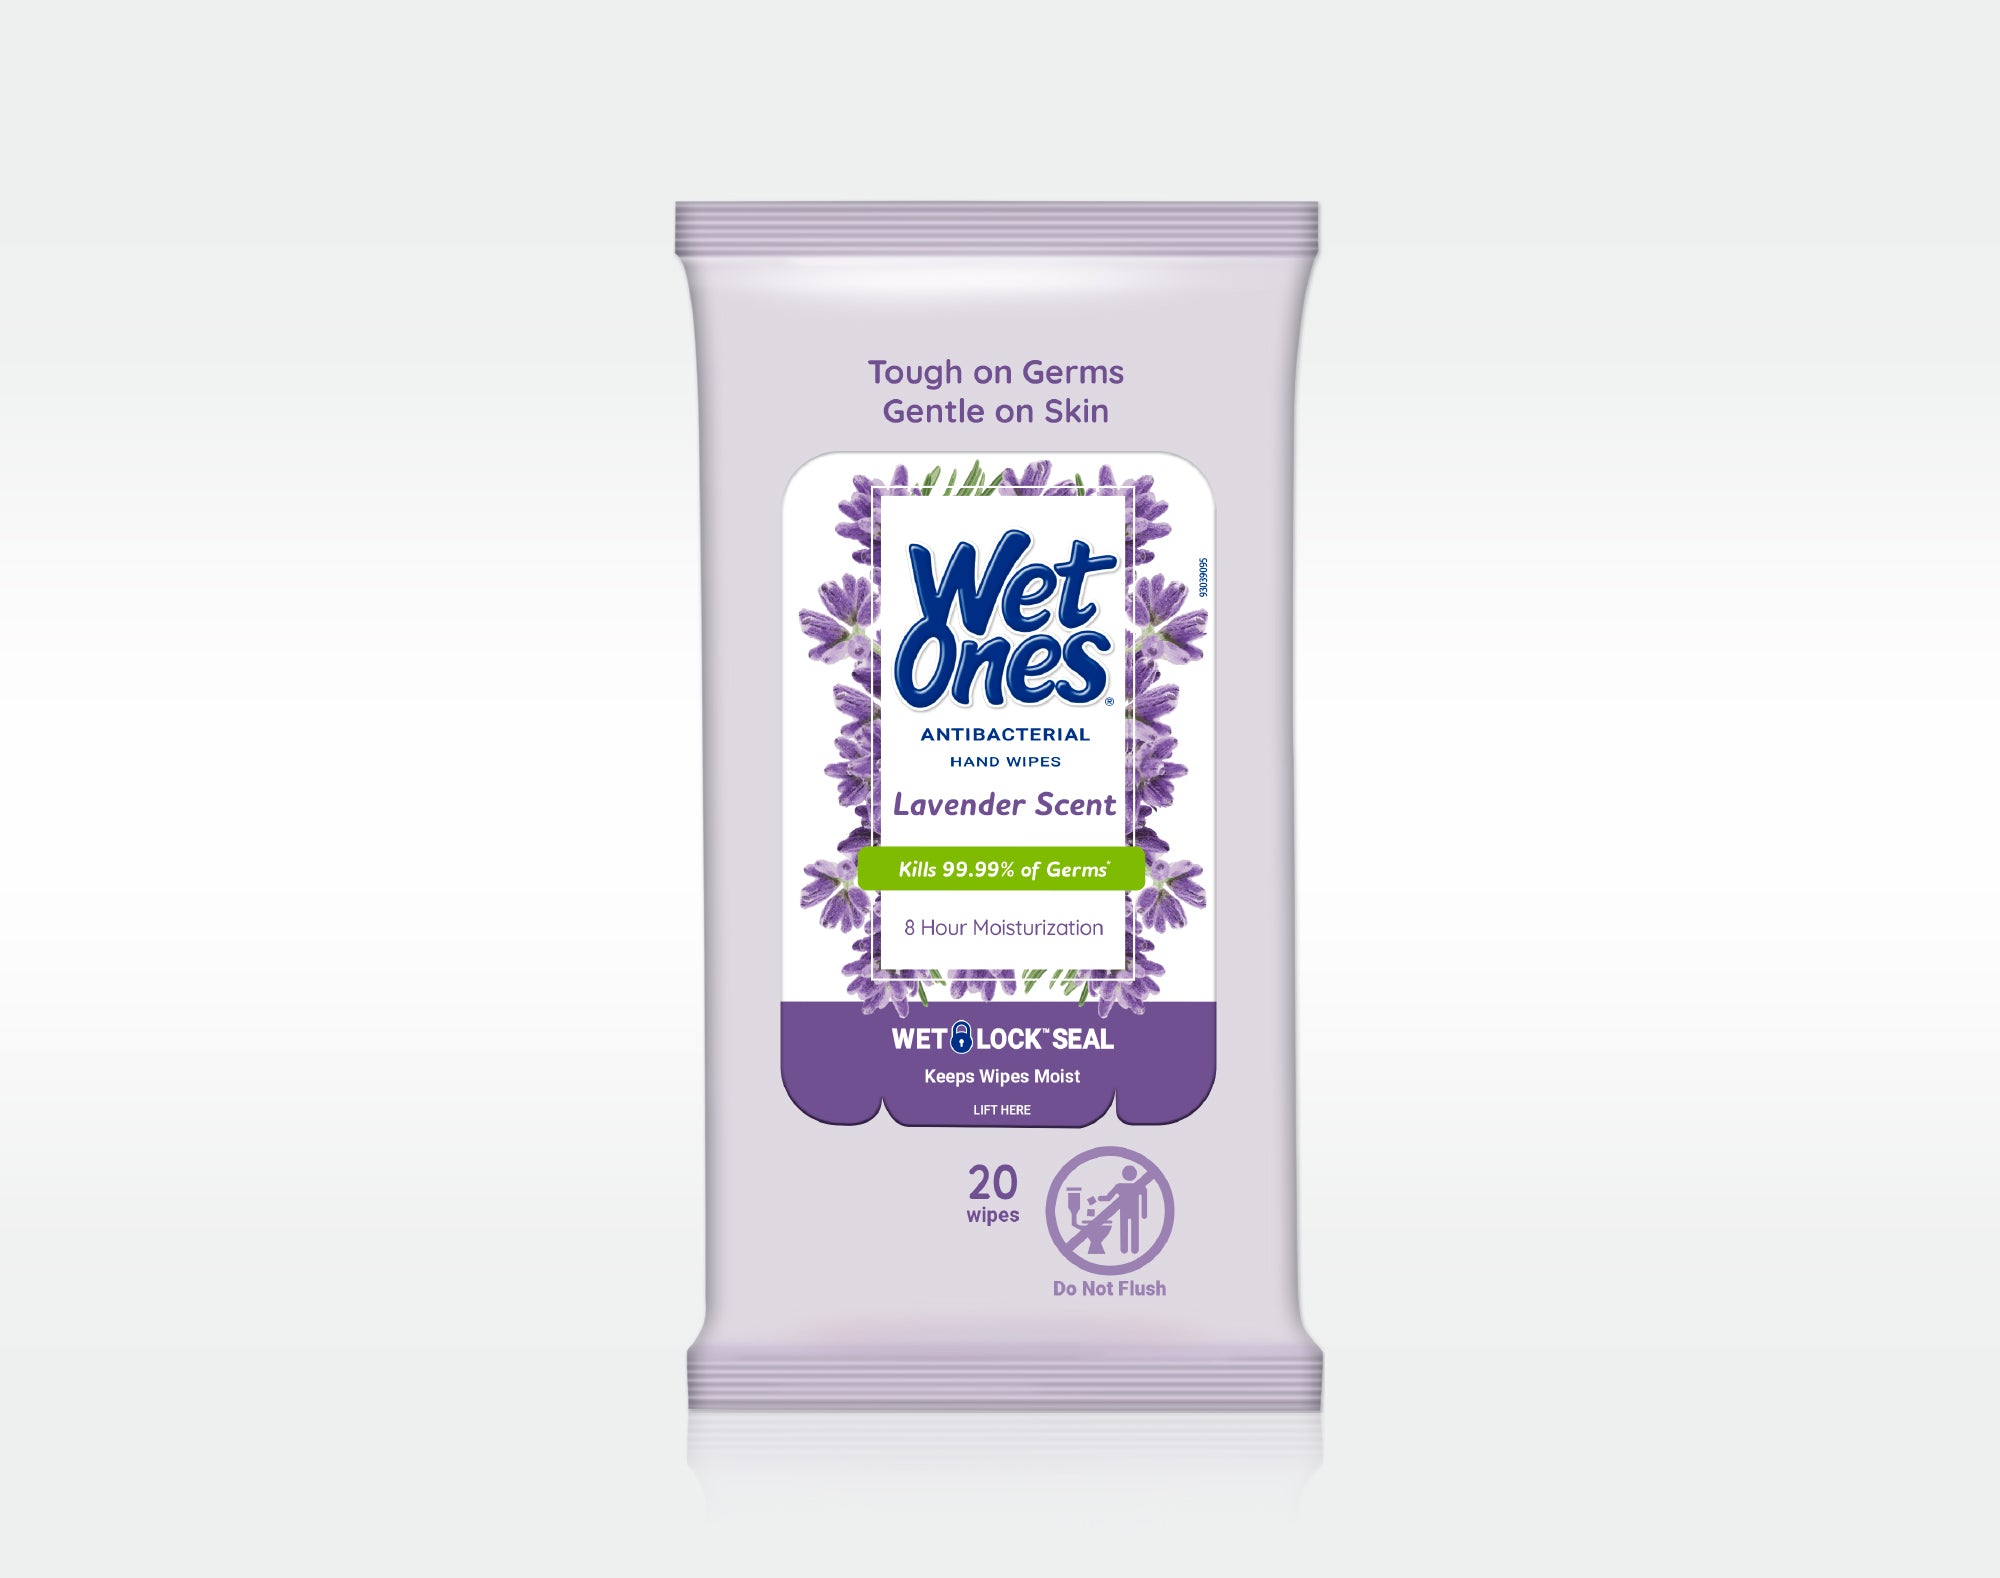 20CT Wet Ones Wipes - Pack of 3